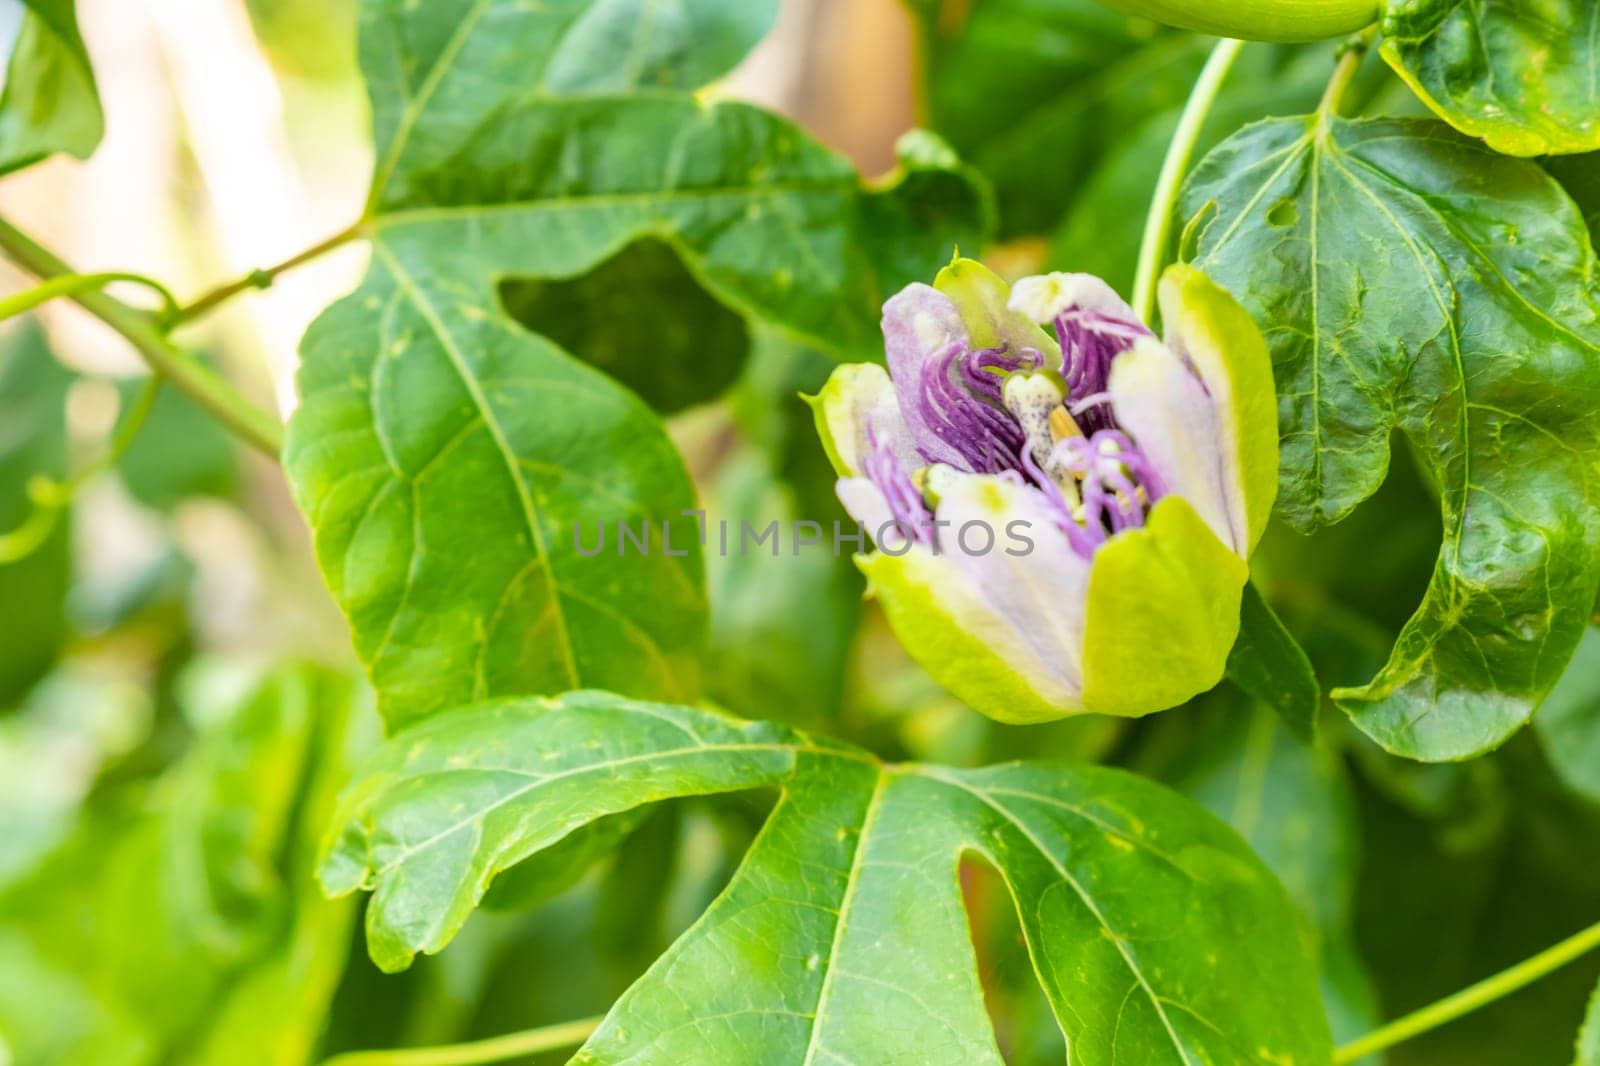 Exotic flower of passion fruit in blossom on the tree.